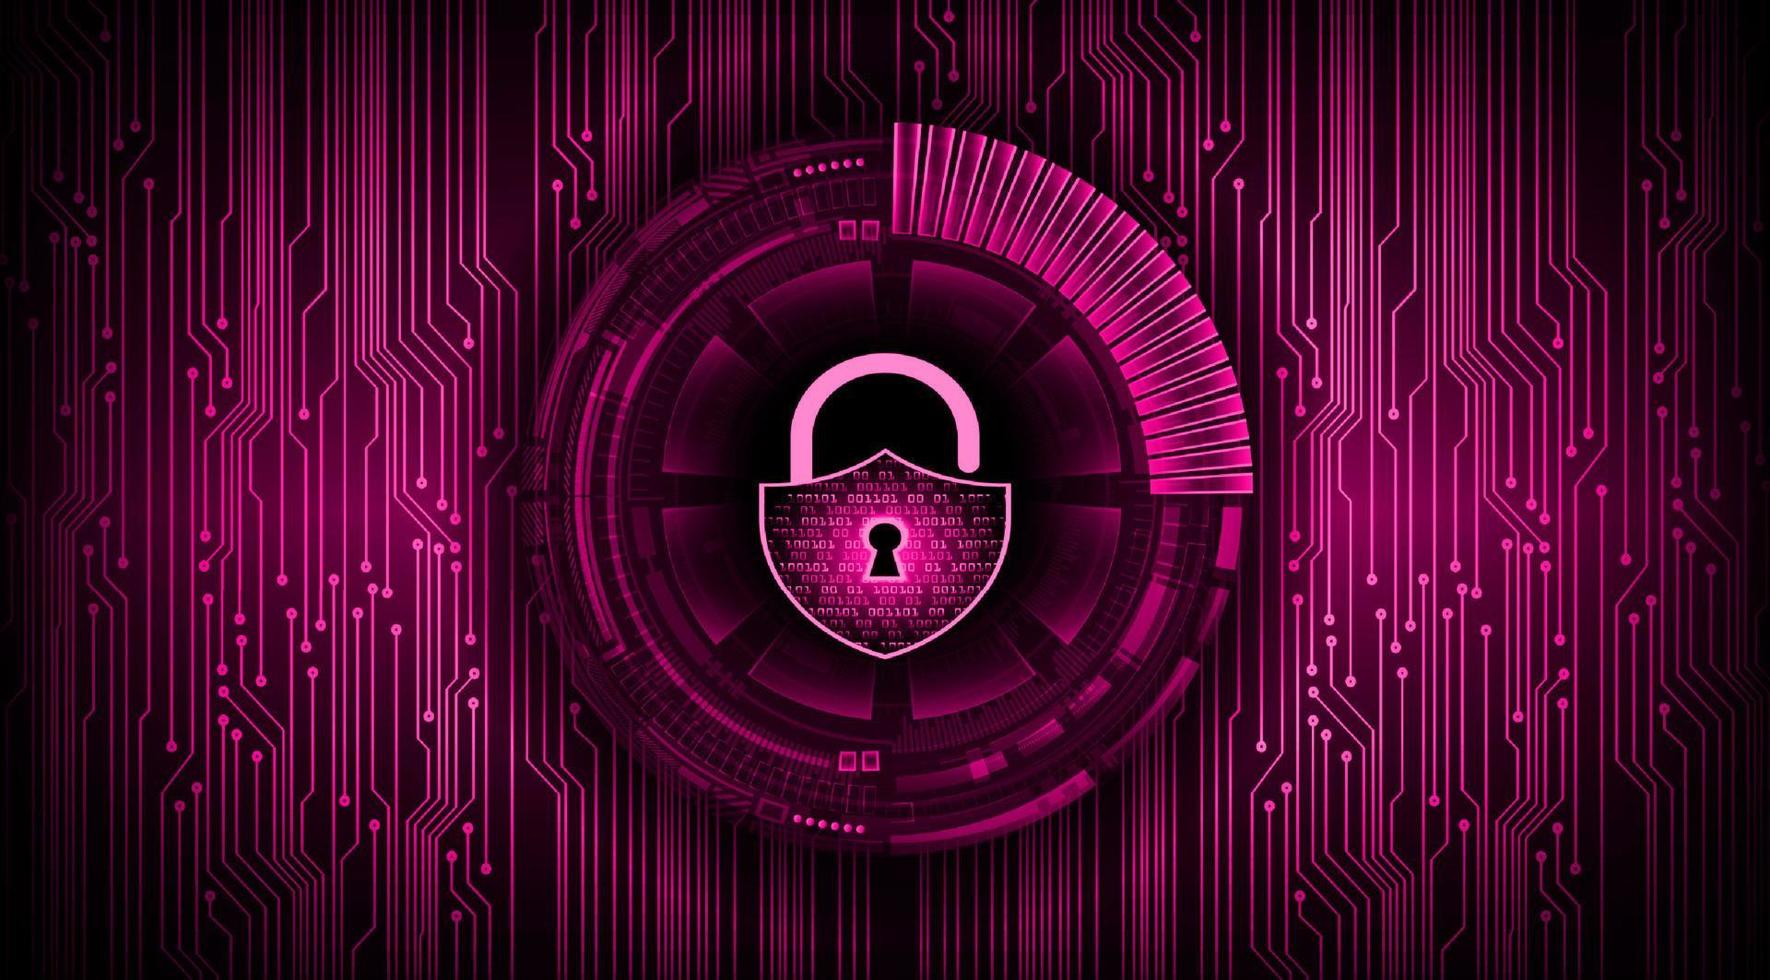 Modern Cyber Security Technology Background with padlock vector